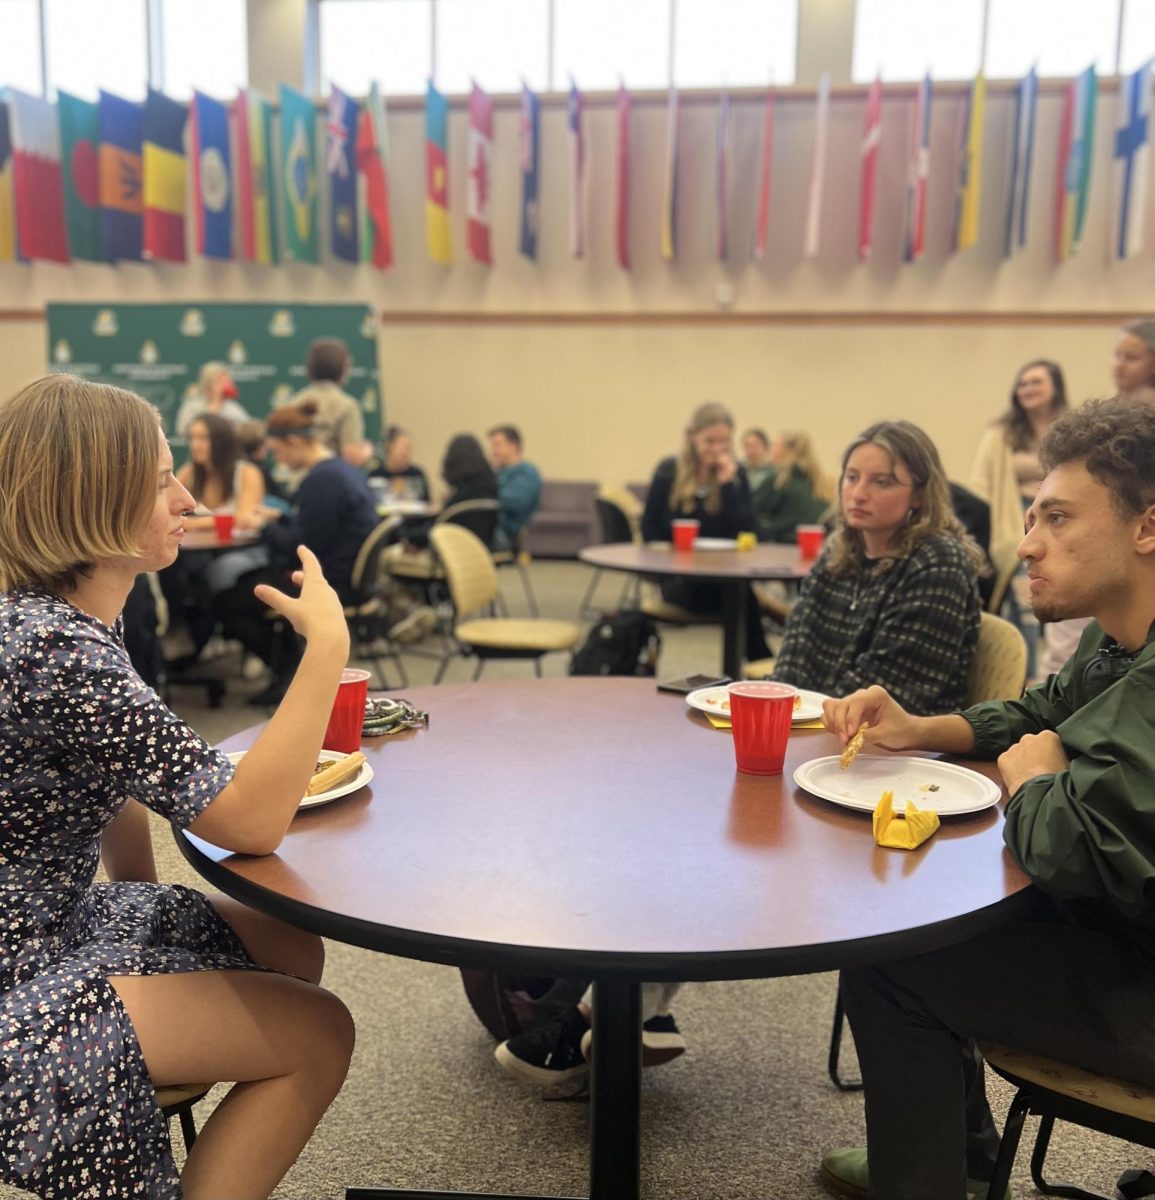 NEW FRIENDS — Students gather to discuss their experiences and what they expect from the program.